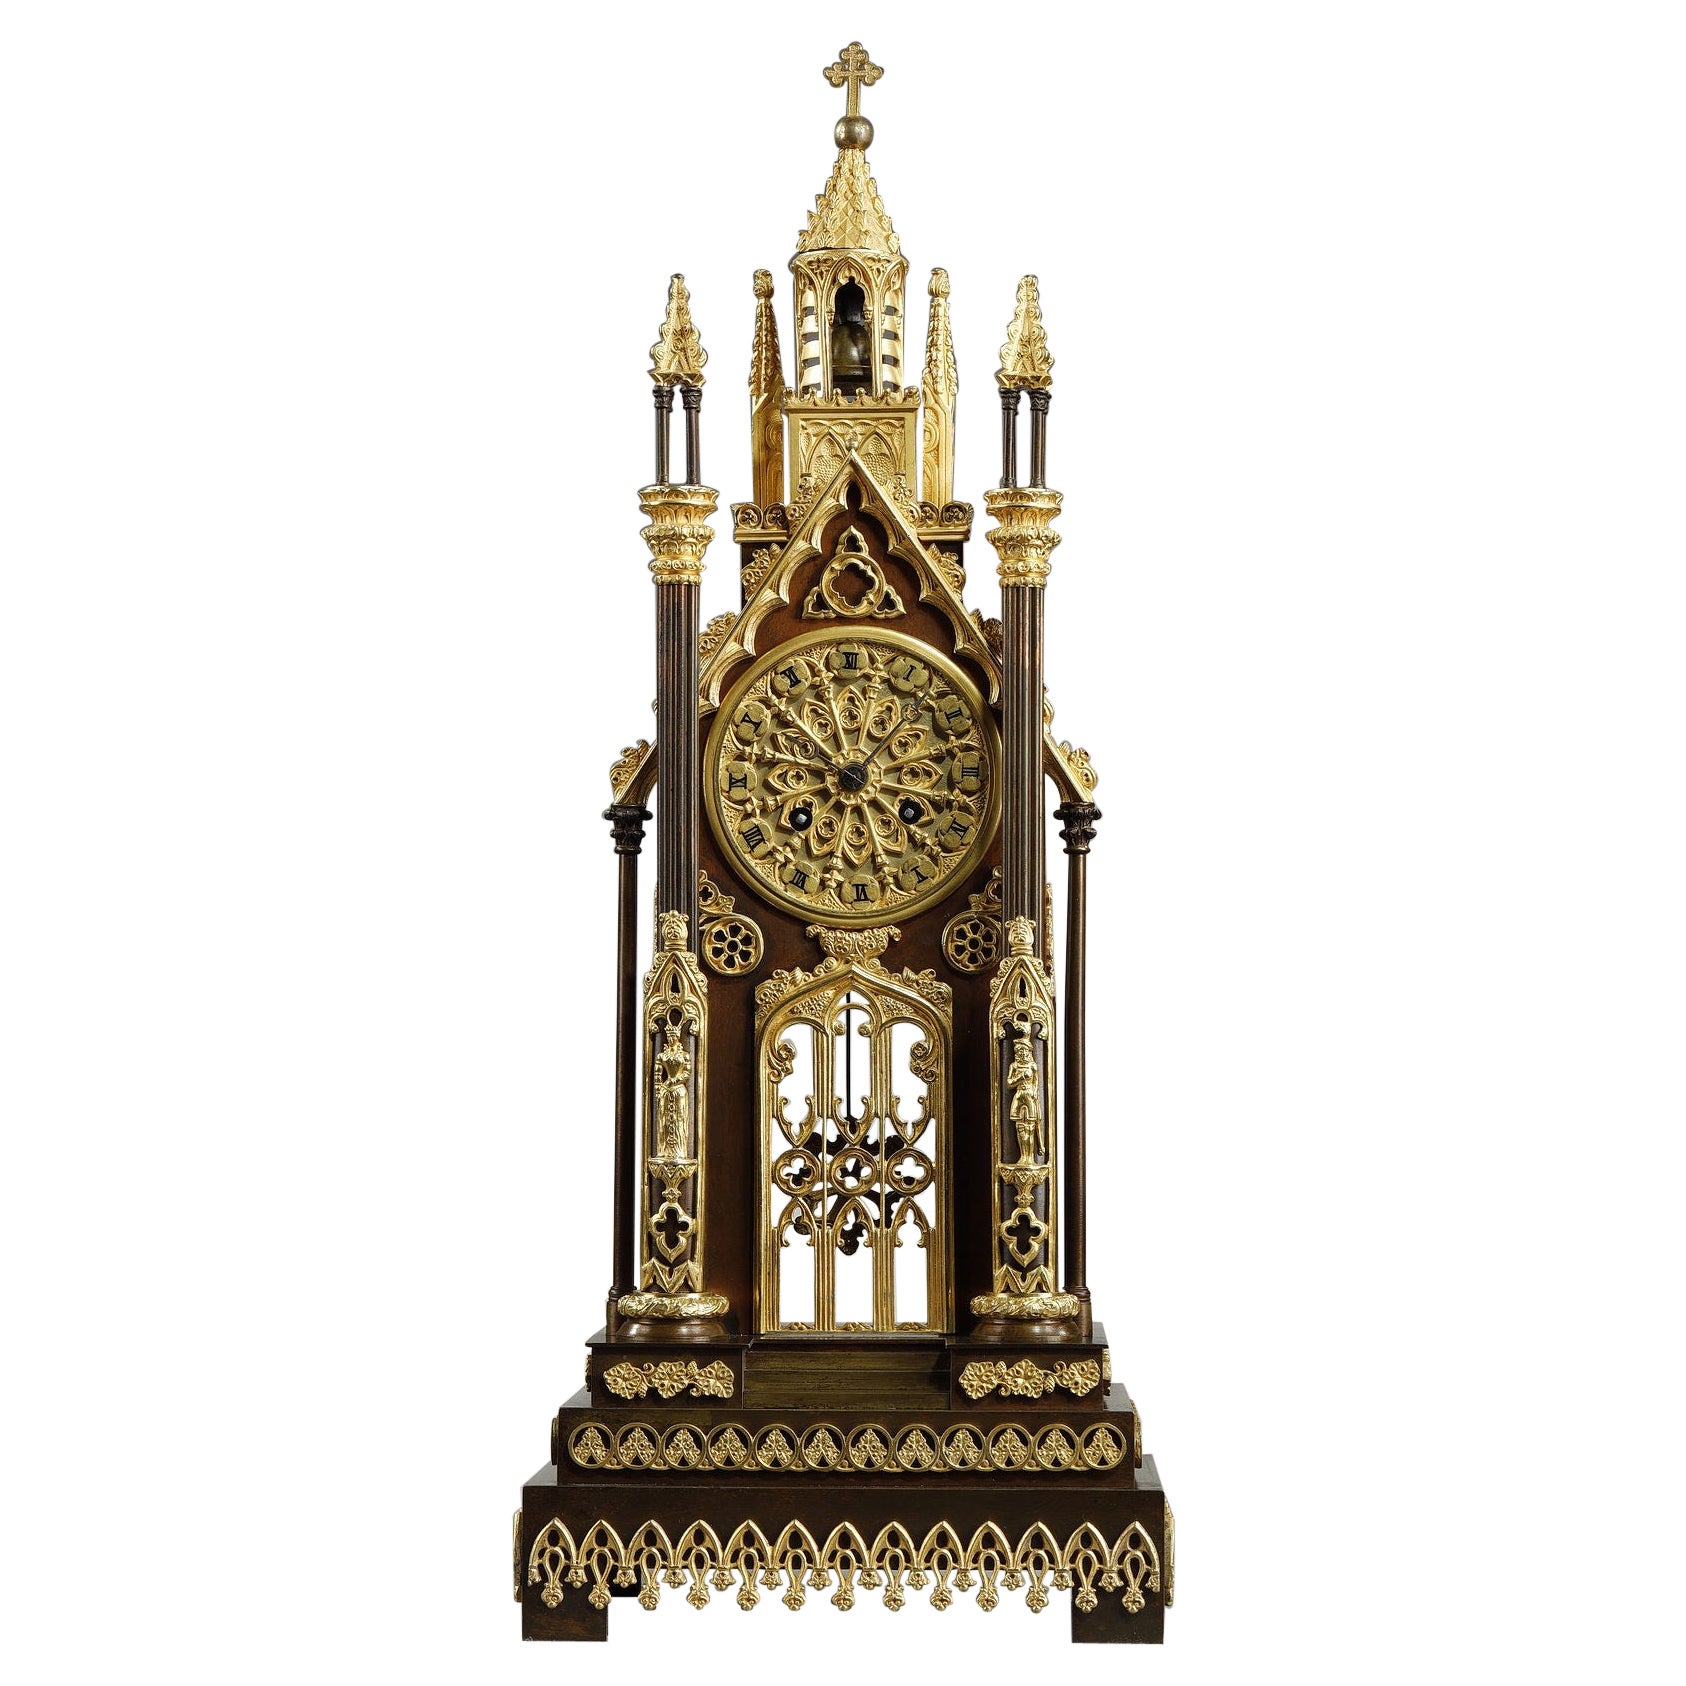 Gilded and Patinated Bronze Cathedral Clock from the Charles X Period